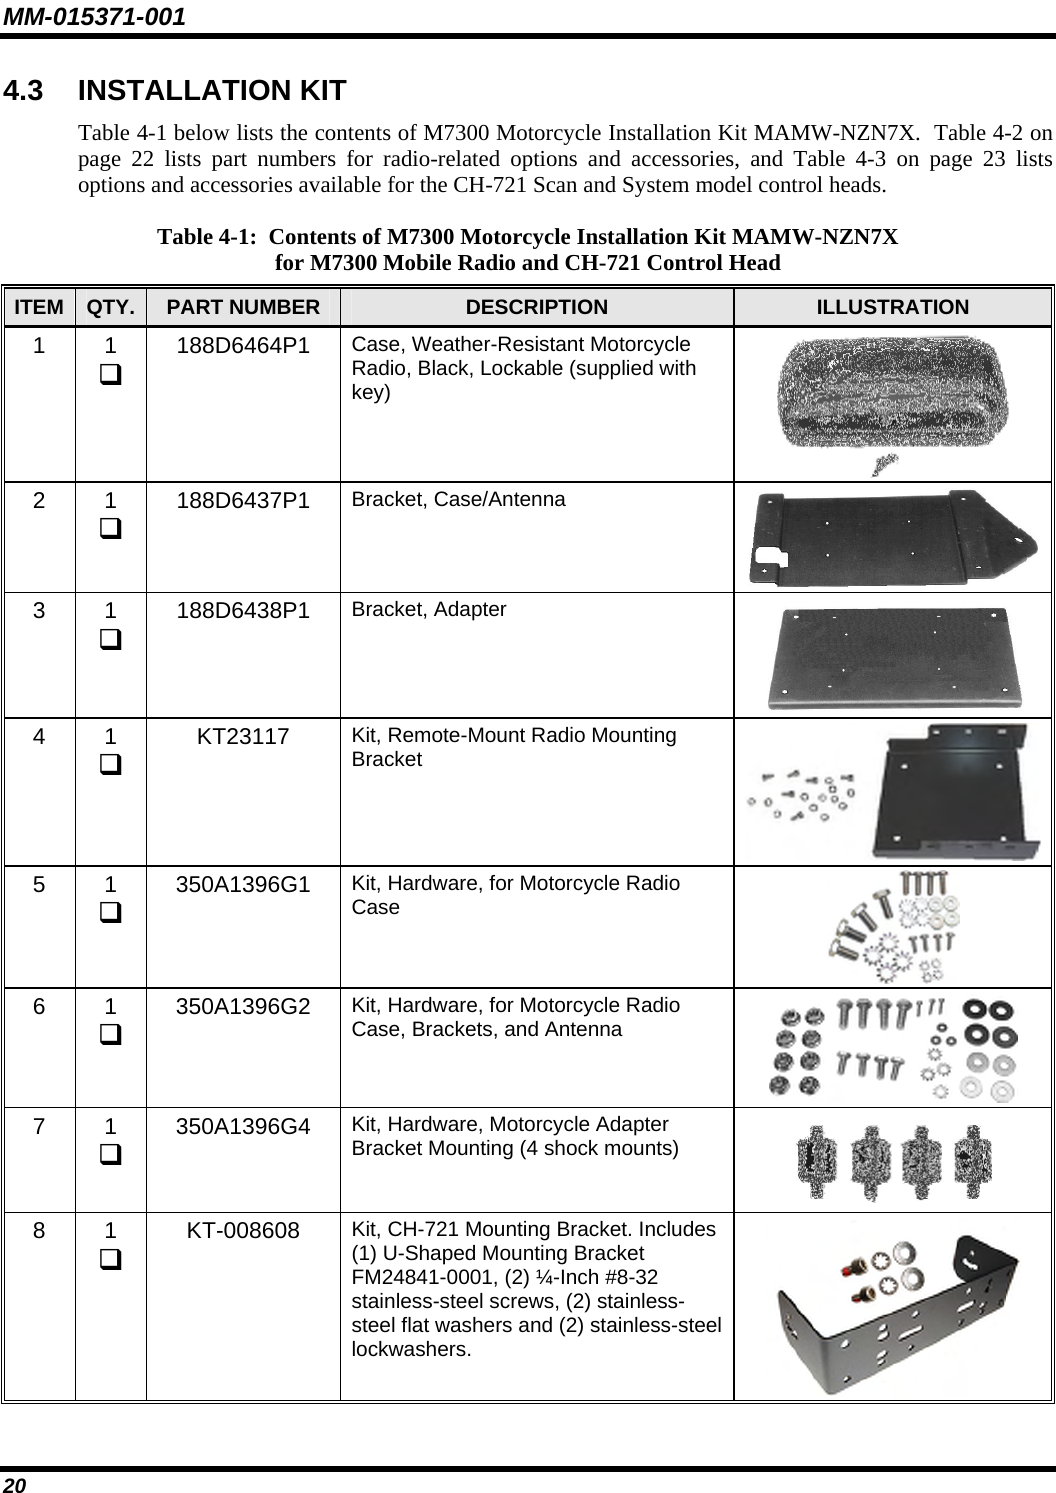 MM-015371-001 4.3  INSTALLATION KIT Table 4-1 below lists the contents of M7300 Motorcycle Installation Kit MAMW-NZN7X.  Table 4-2 on page  22 lists part numbers for radio-related options and accessories, and Table 4-3 on page 23 lists options and accessories available for the CH-721 Scan and System model control heads. Table 4-1:  Contents of M7300 Motorcycle Installation Kit MAMW-NZN7X for M7300 Mobile Radio and CH-721 Control Head ITEM  QTY.  PART NUMBER  DESCRIPTION  ILLUSTRATION 1 1  188D6464P1  Case, Weather-Resistant Motorcycle Radio, Black, Lockable (supplied with key)  2 1  188D6437P1  Bracket, Case/Antenna  3 1  188D6438P1  Bracket, Adapter  4 1  KT23117  Kit, Remote-Mount Radio Mounting Bracket  5 1  350A1396G1  Kit, Hardware, for Motorcycle Radio Case  6 1  350A1396G2  Kit, Hardware, for Motorcycle Radio Case, Brackets, and Antenna  7 1  350A1396G4  Kit, Hardware, Motorcycle Adapter Bracket Mounting (4 shock mounts)  8 1  KT-008608  Kit, CH-721 Mounting Bracket. Includes (1) U-Shaped Mounting Bracket FM24841-0001, (2) ¼-Inch #8-32 stainless-steel screws, (2) stainless-steel flat washers and (2) stainless-steel lockwashers.  20 